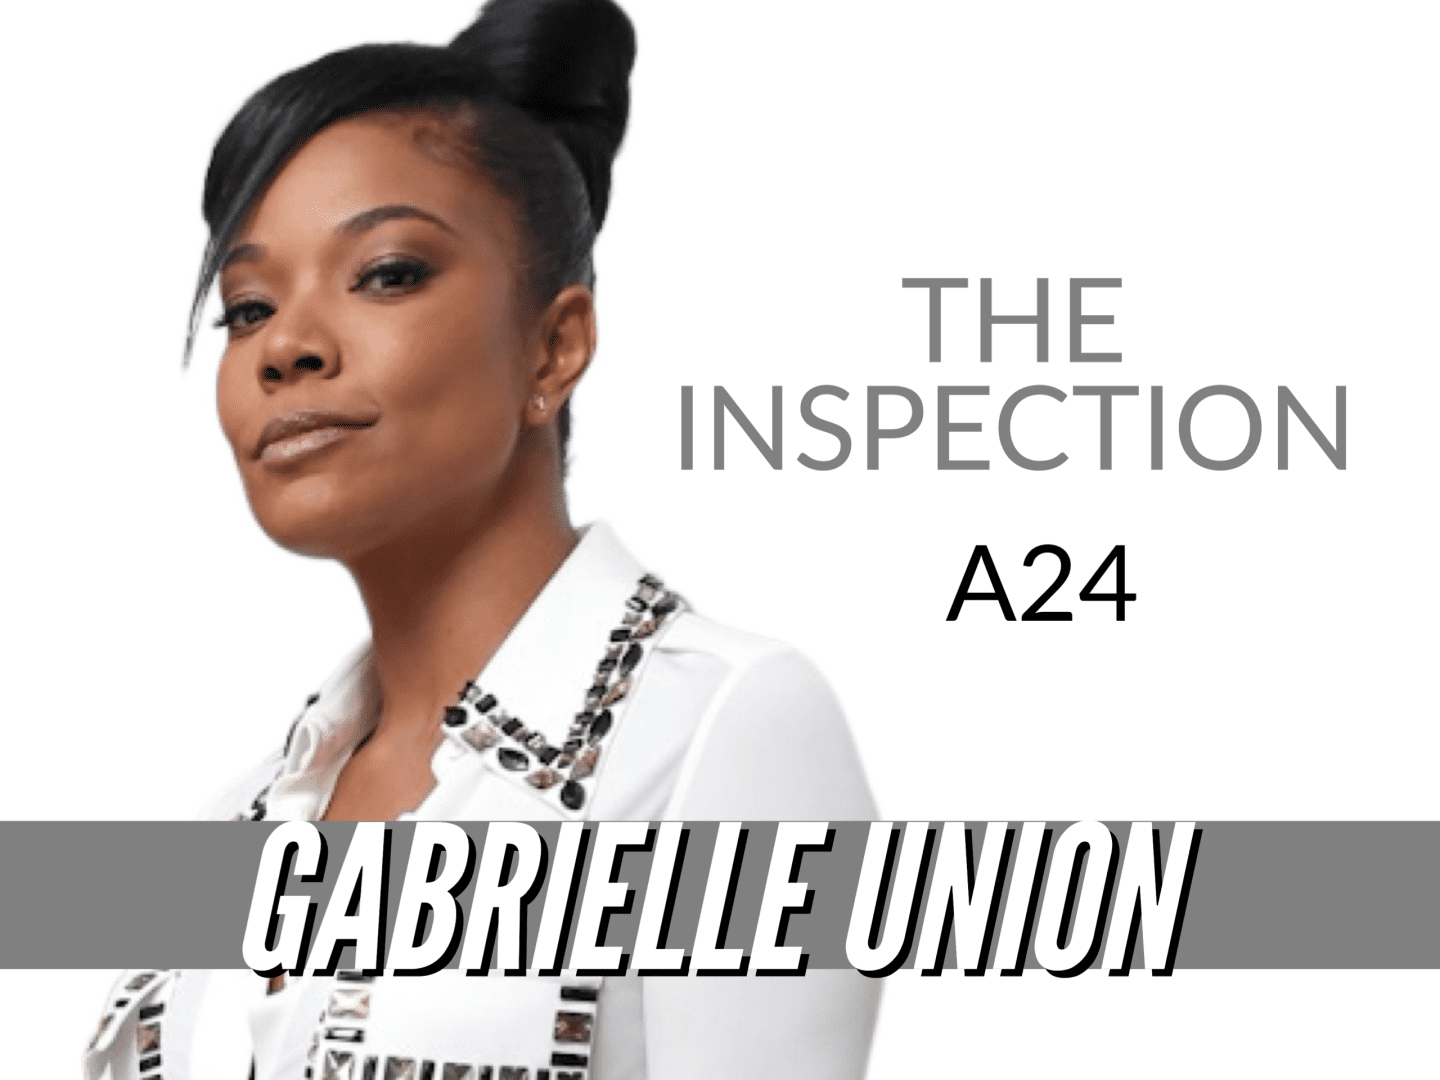 Gabrielle Union shares the steps she took preparing for 'The Inspection'